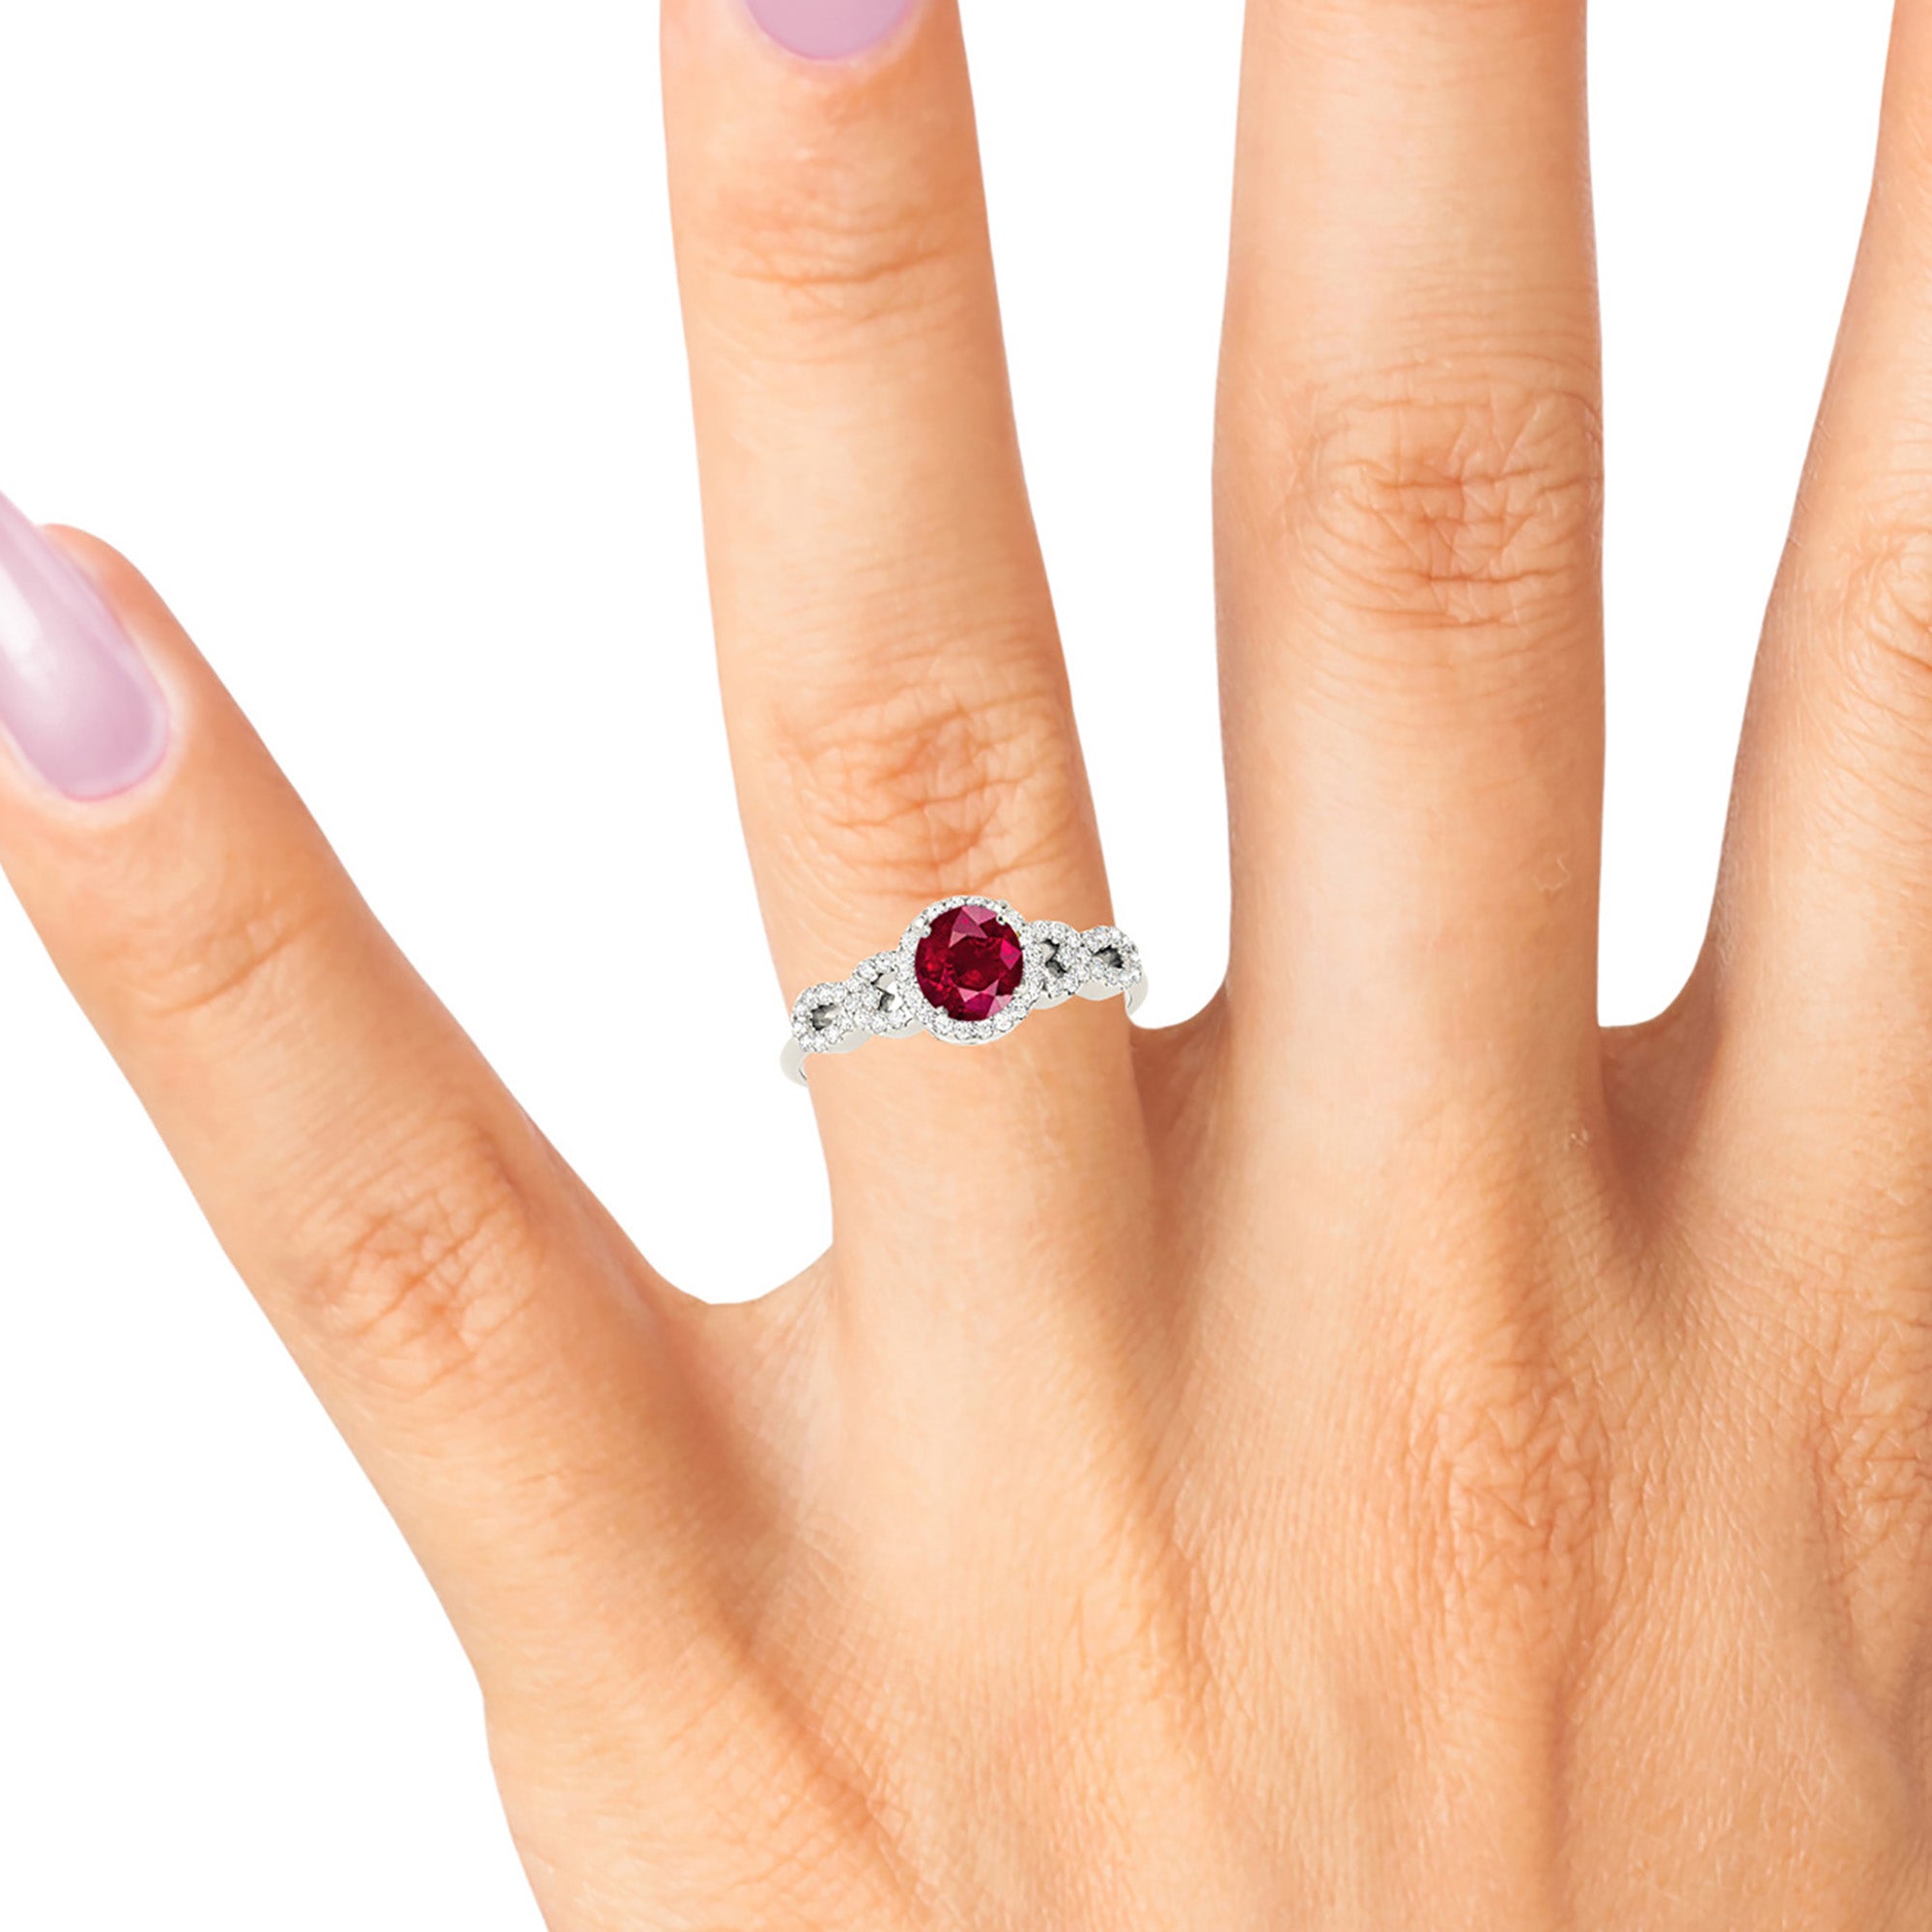 1.35 ct. Genuine Ruby Ring With 0.25 ctw. Diamond Halo, Open Rounded Fancy Diamond Band, High Setting | Ruby Halo Ring | Natural Ruby Ring-in 14K/18K White, Yellow, Rose Gold and Platinum - Christmas Jewelry Gift -VIRABYANI